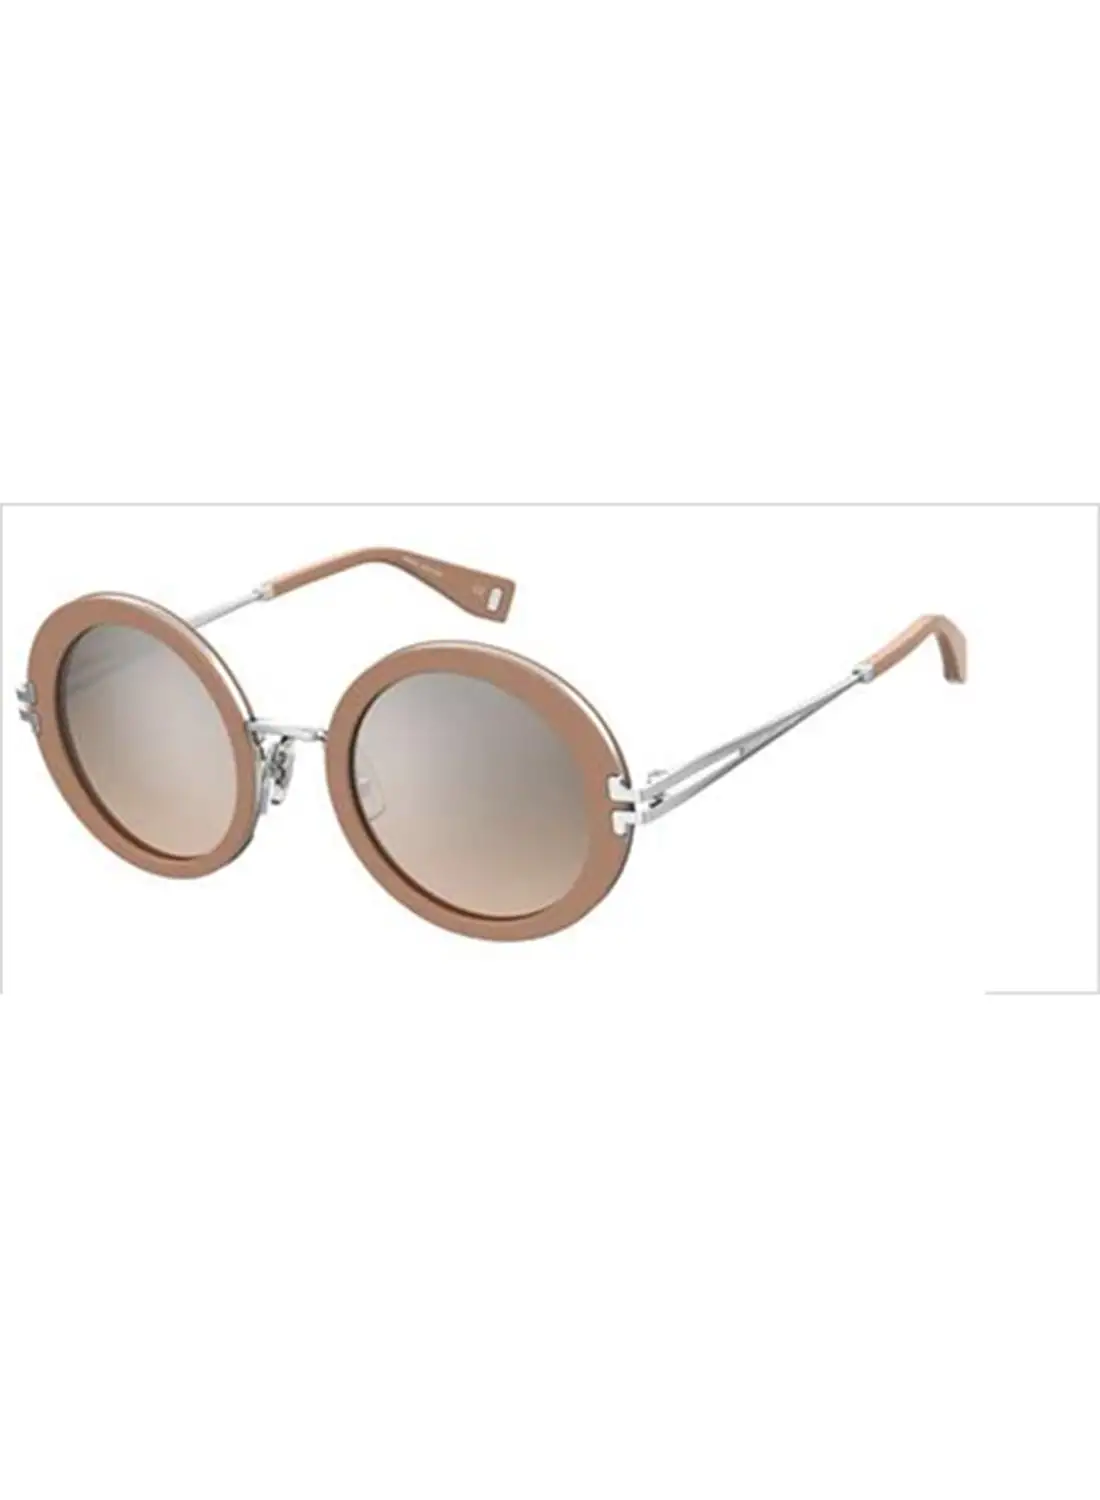 Marc Jacobs Women's UV Protection Round Sunglasses - Mj 1102/S Pink 24 - Lens Size: 49.1 Mm